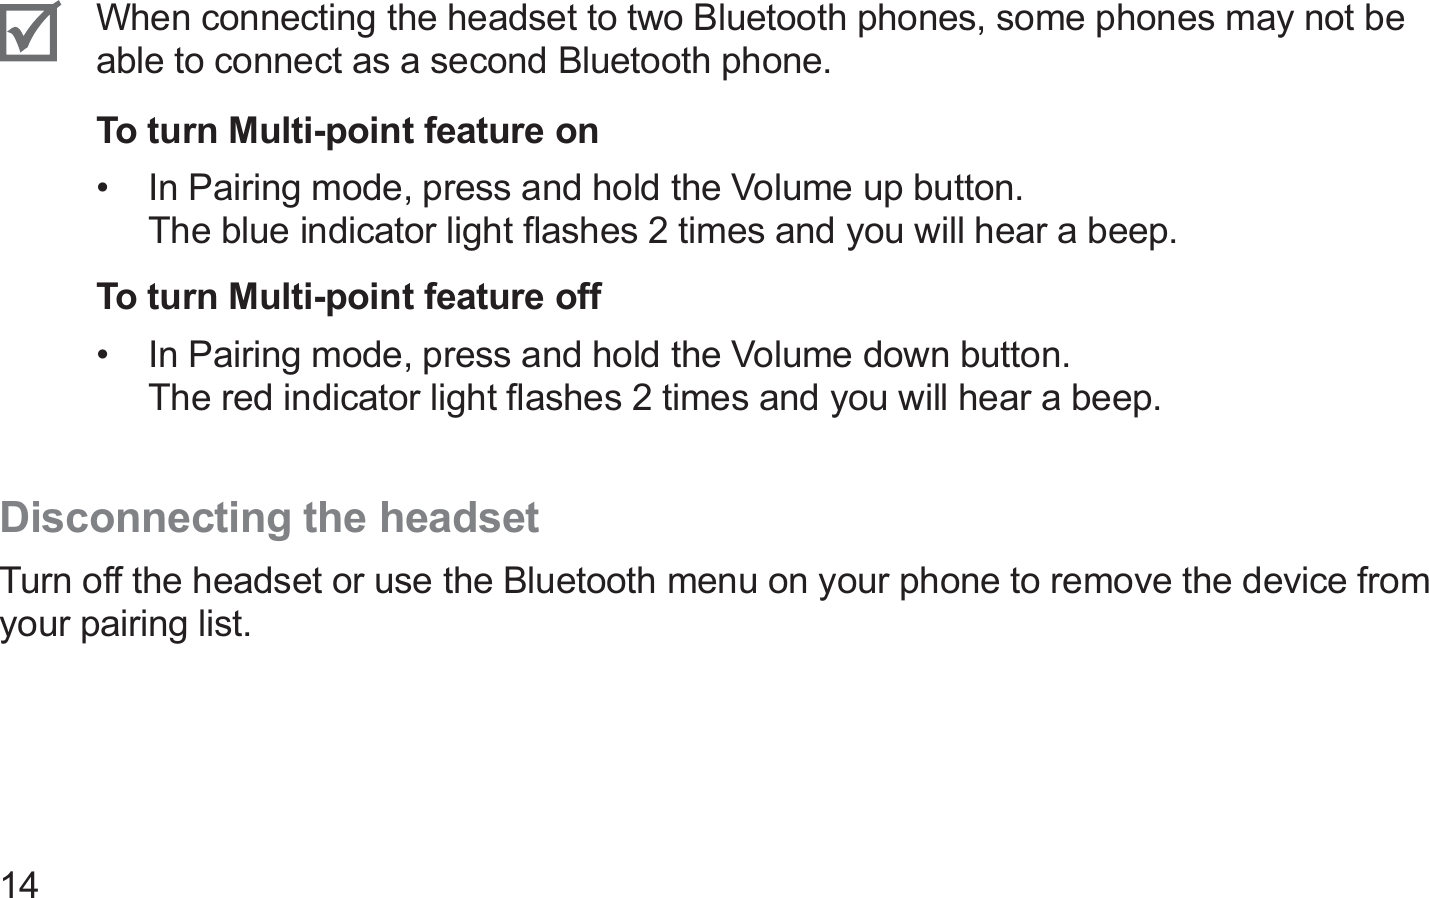 14When connecting the headset to two Bluetooth phones, some phones may not be able to connect as a second Bluetooth phone.To turn Multi-point feature onIn Pairing mode, press and hold the Volume up button.  • The blue indicator light ﬂashes 2 times and you will hear a beep.To turn Multi-point feature offIn Pairing mode, press and hold the Volume down button.  • The red indicator light ﬂashes 2 times and you will hear a beep.Disconnecting the headsetTurn off the headset or use the Bluetooth menu on your phone to remove the device from your pairing list.